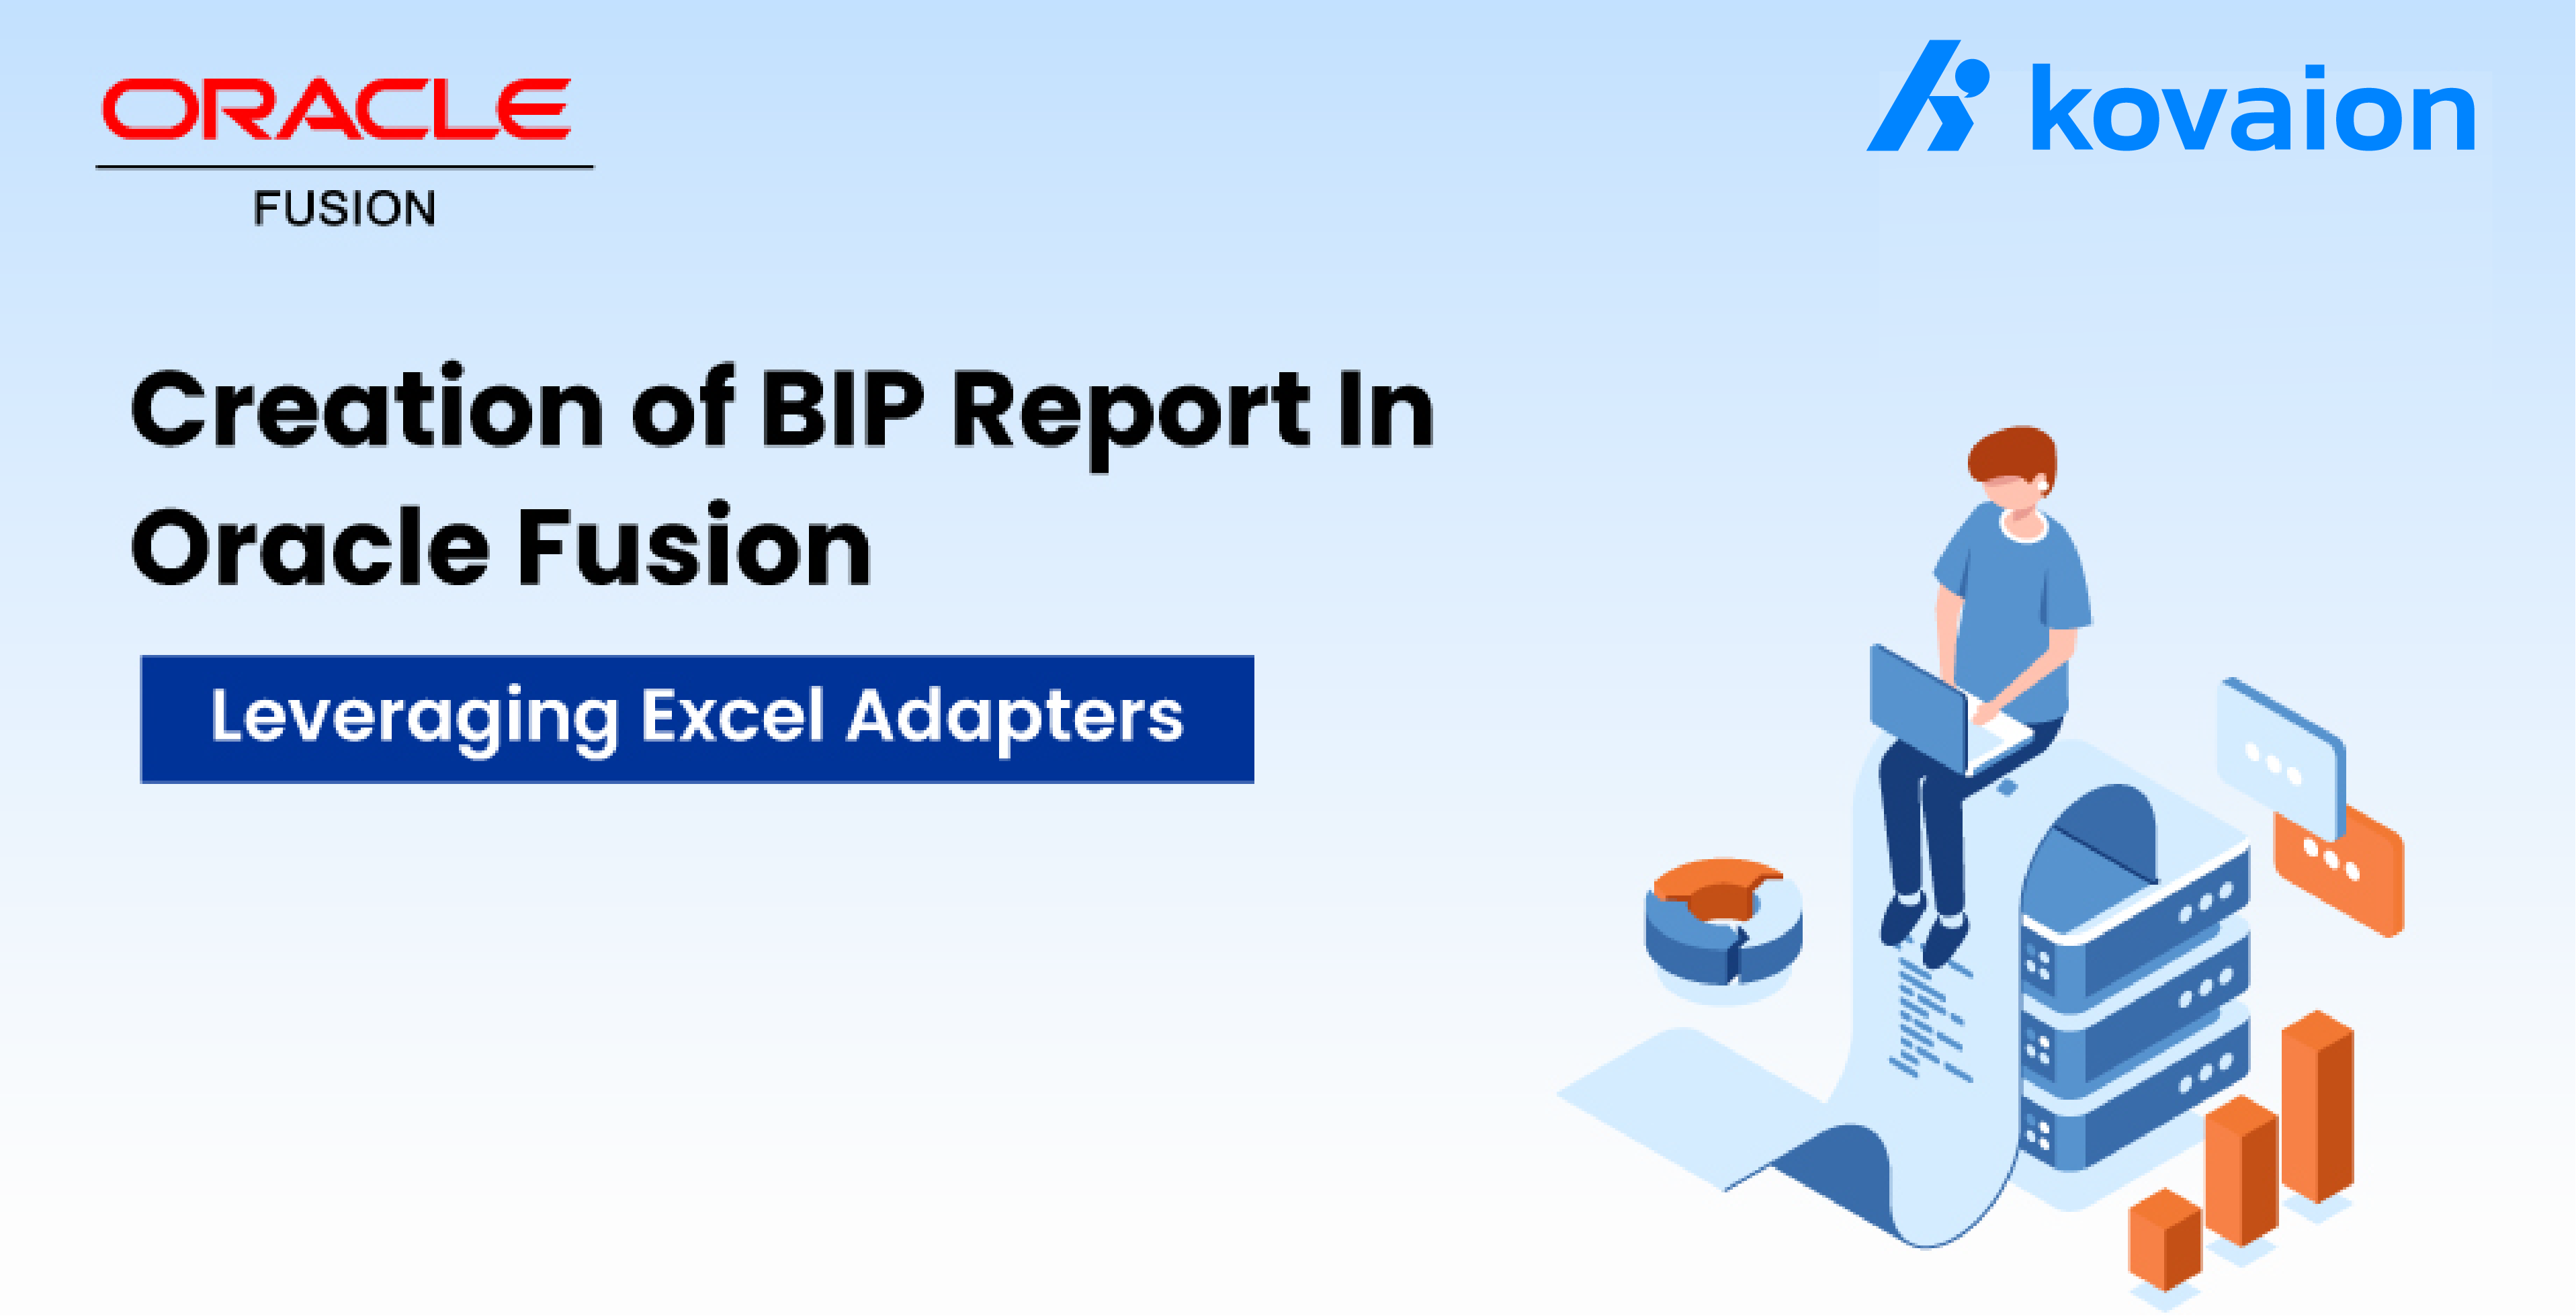 Creation-of-BIP-Report--Leveraging-Excel-Adapters-In-Oracle-Fusion